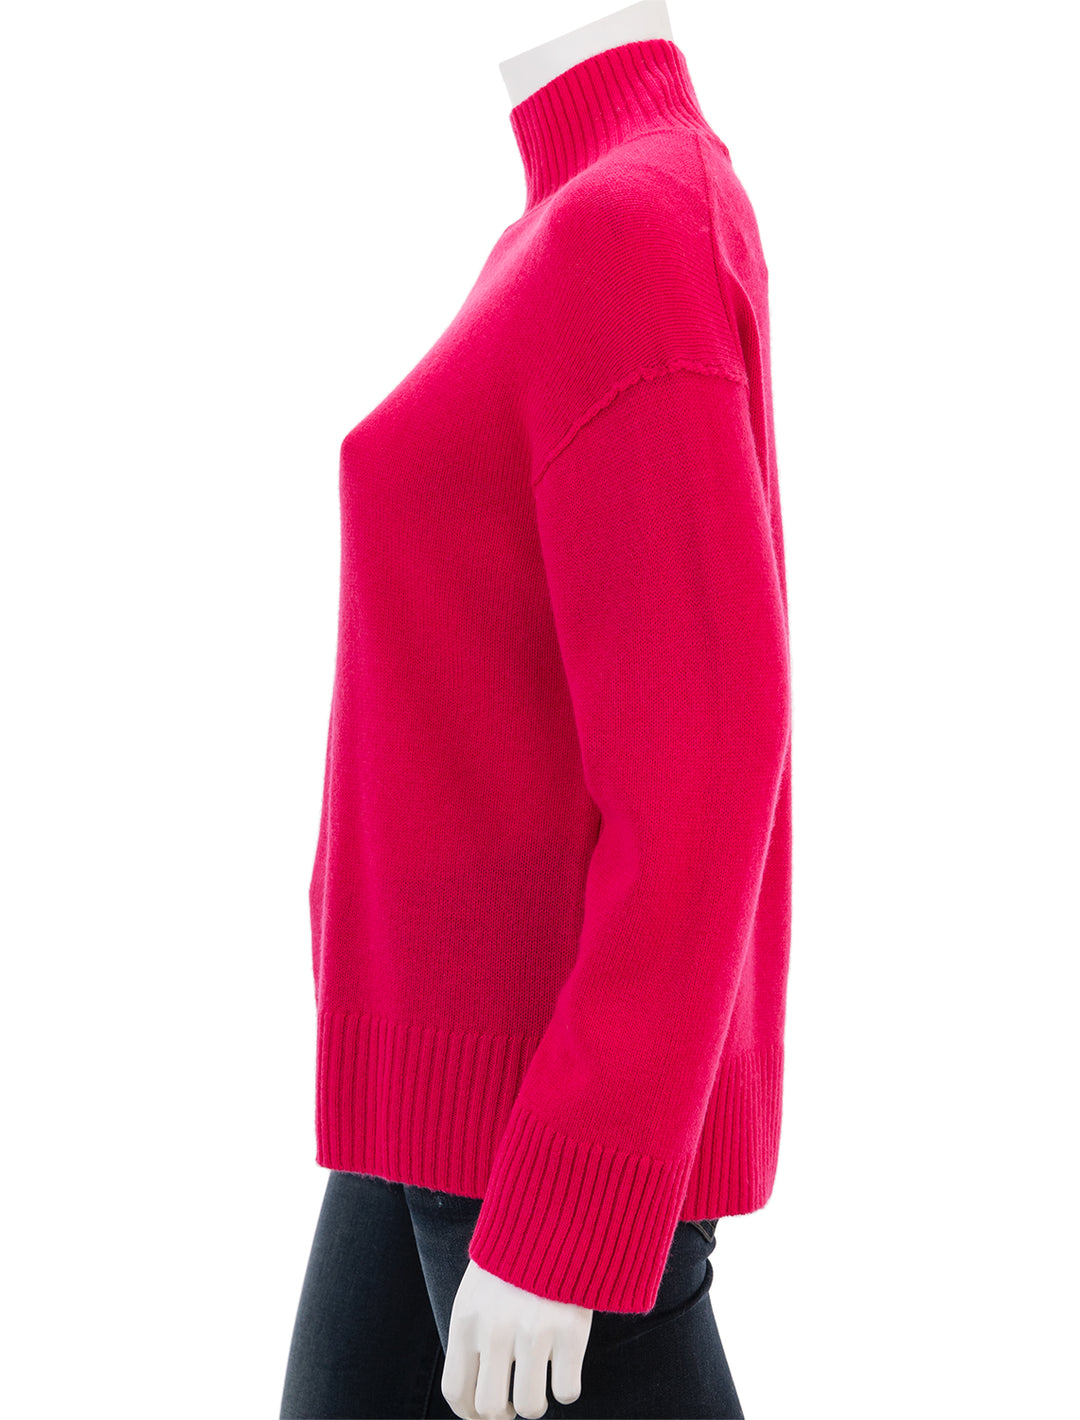 Side view of Rails' sasha pullover in cerise.